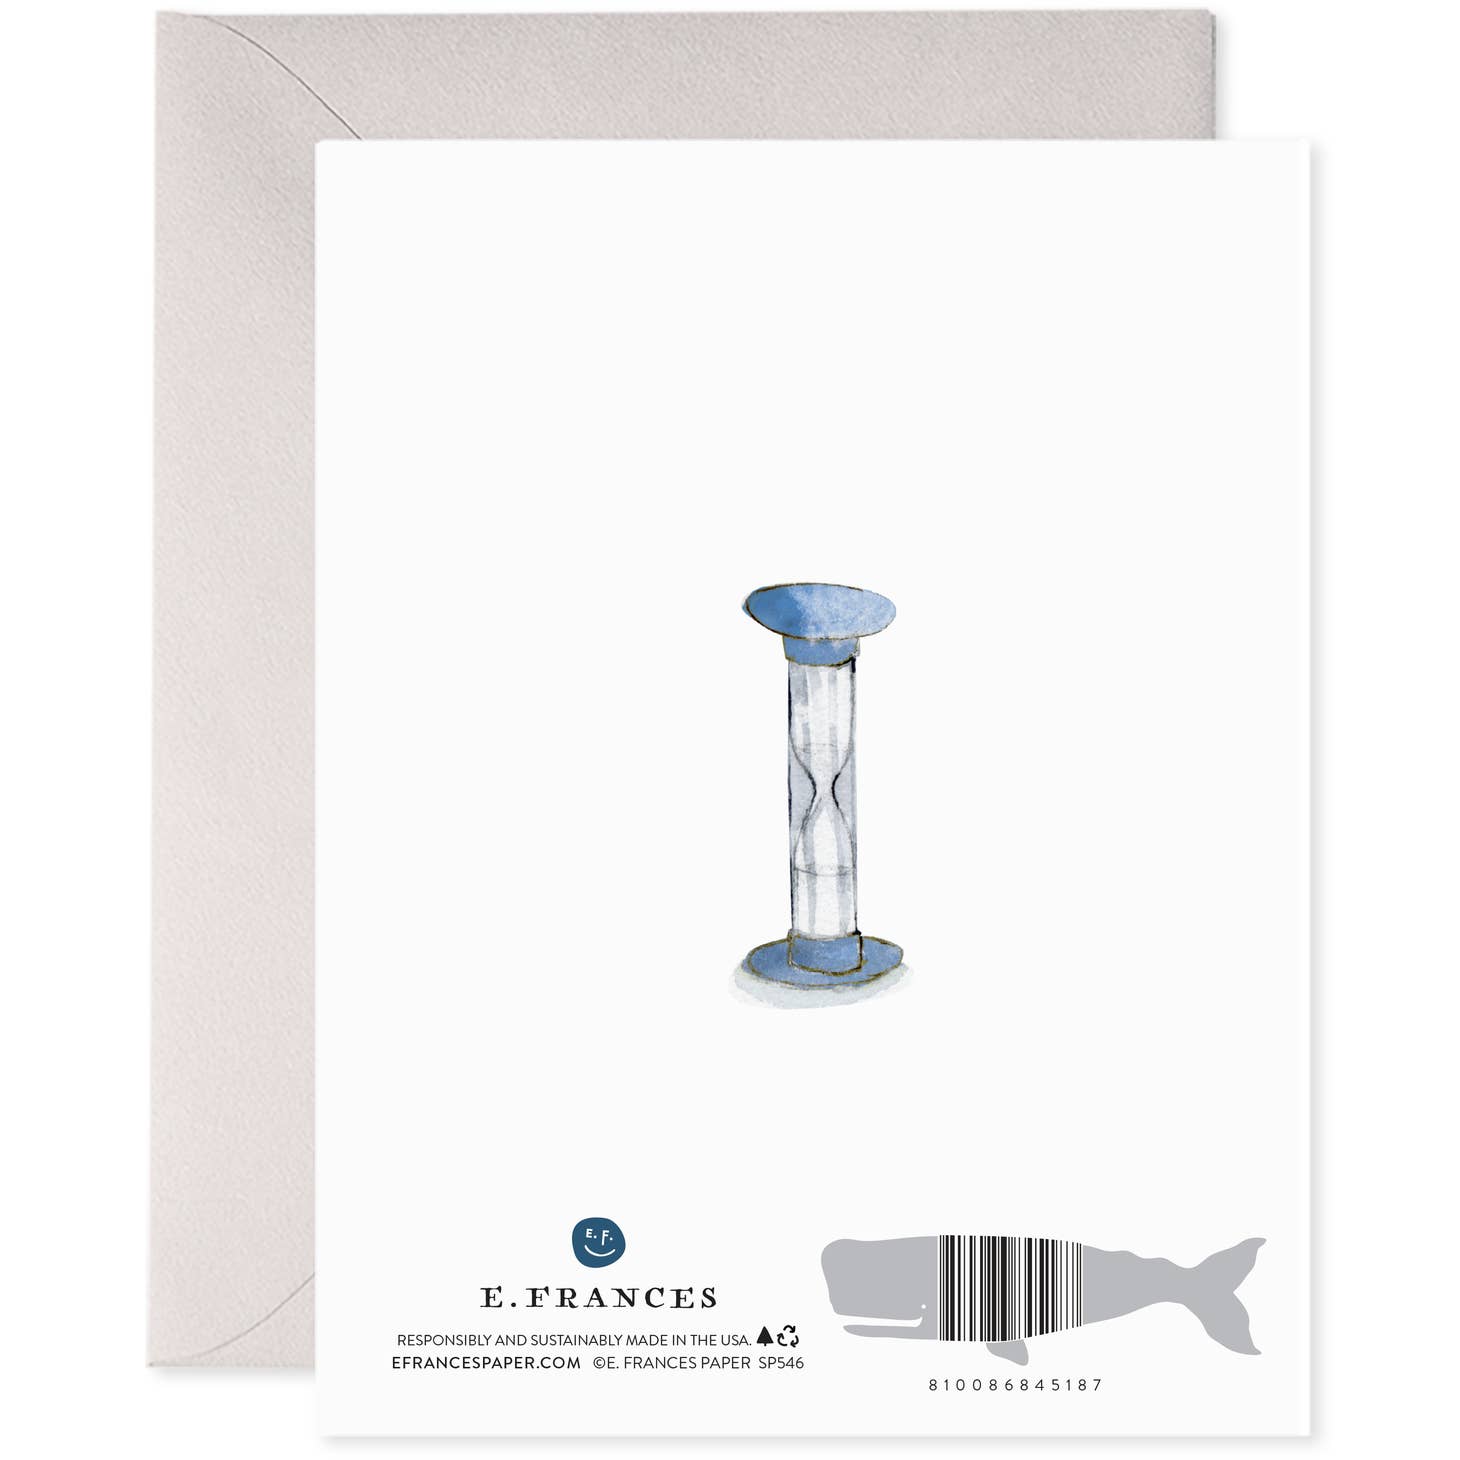 White background with image of blue and white boggle hourglass timer. A grey envelope is included. 